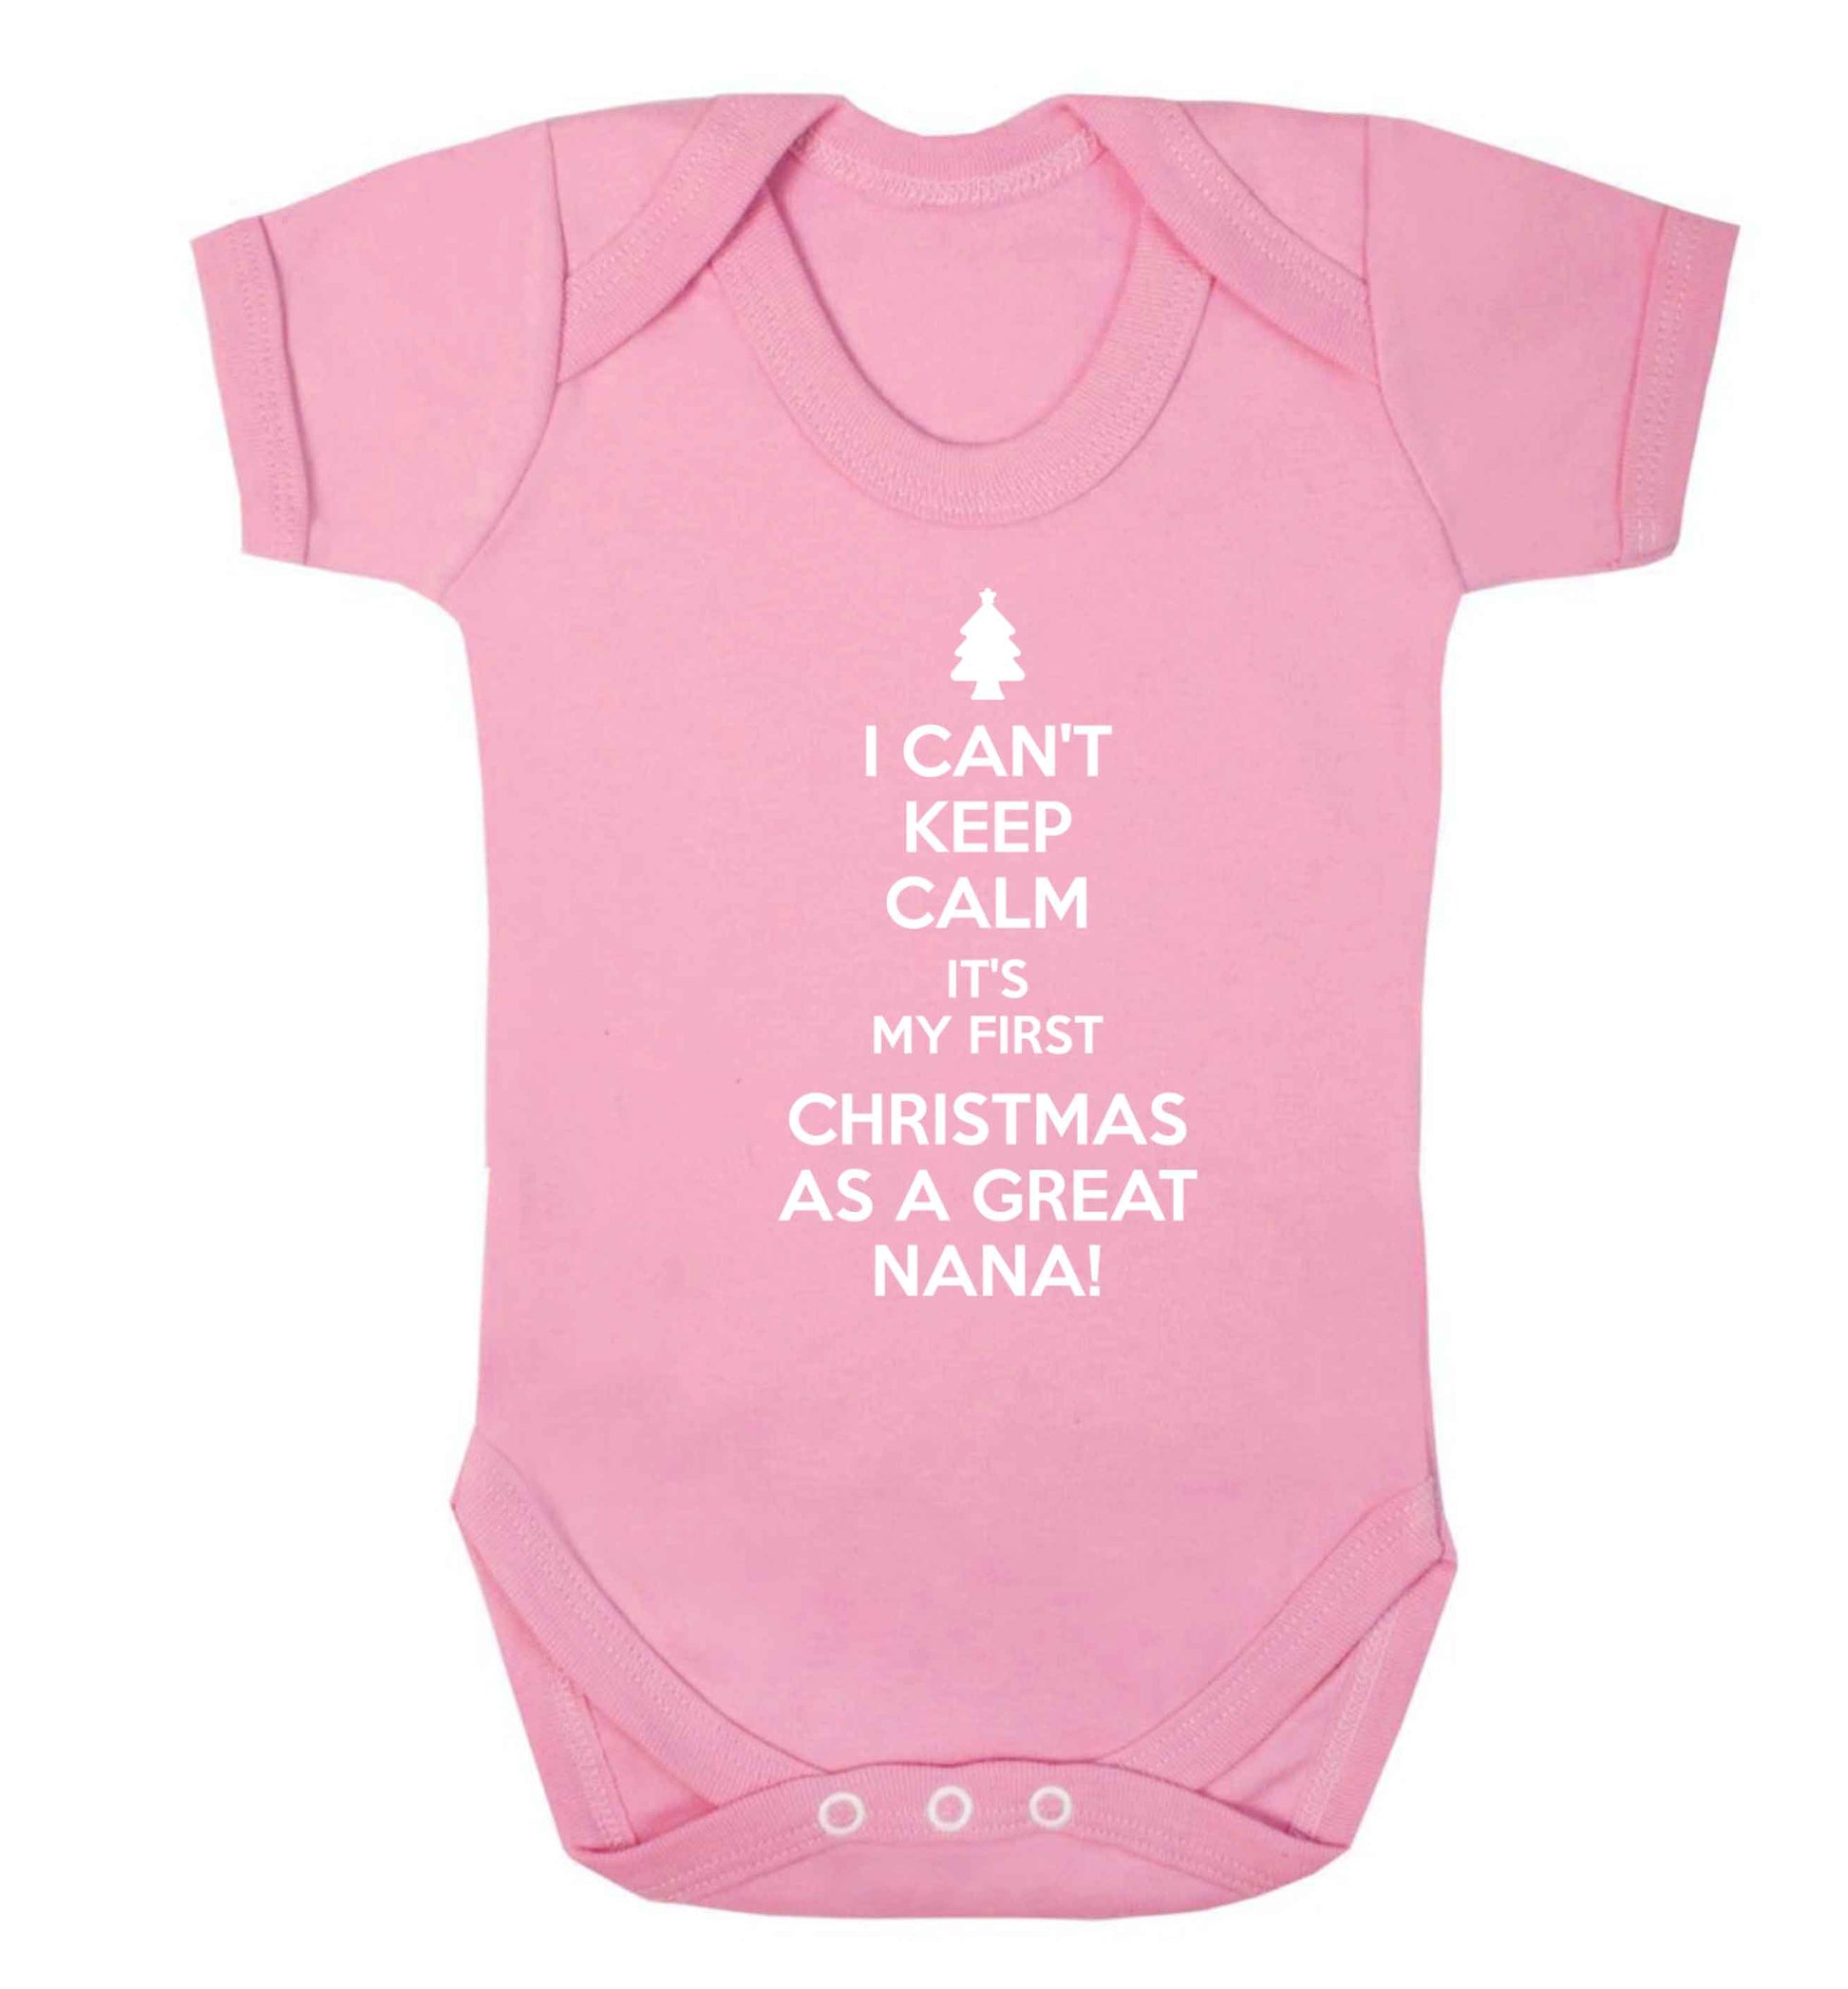 I can't keep calm it's my first Christmas as a great nana! Baby Vest pale pink 18-24 months